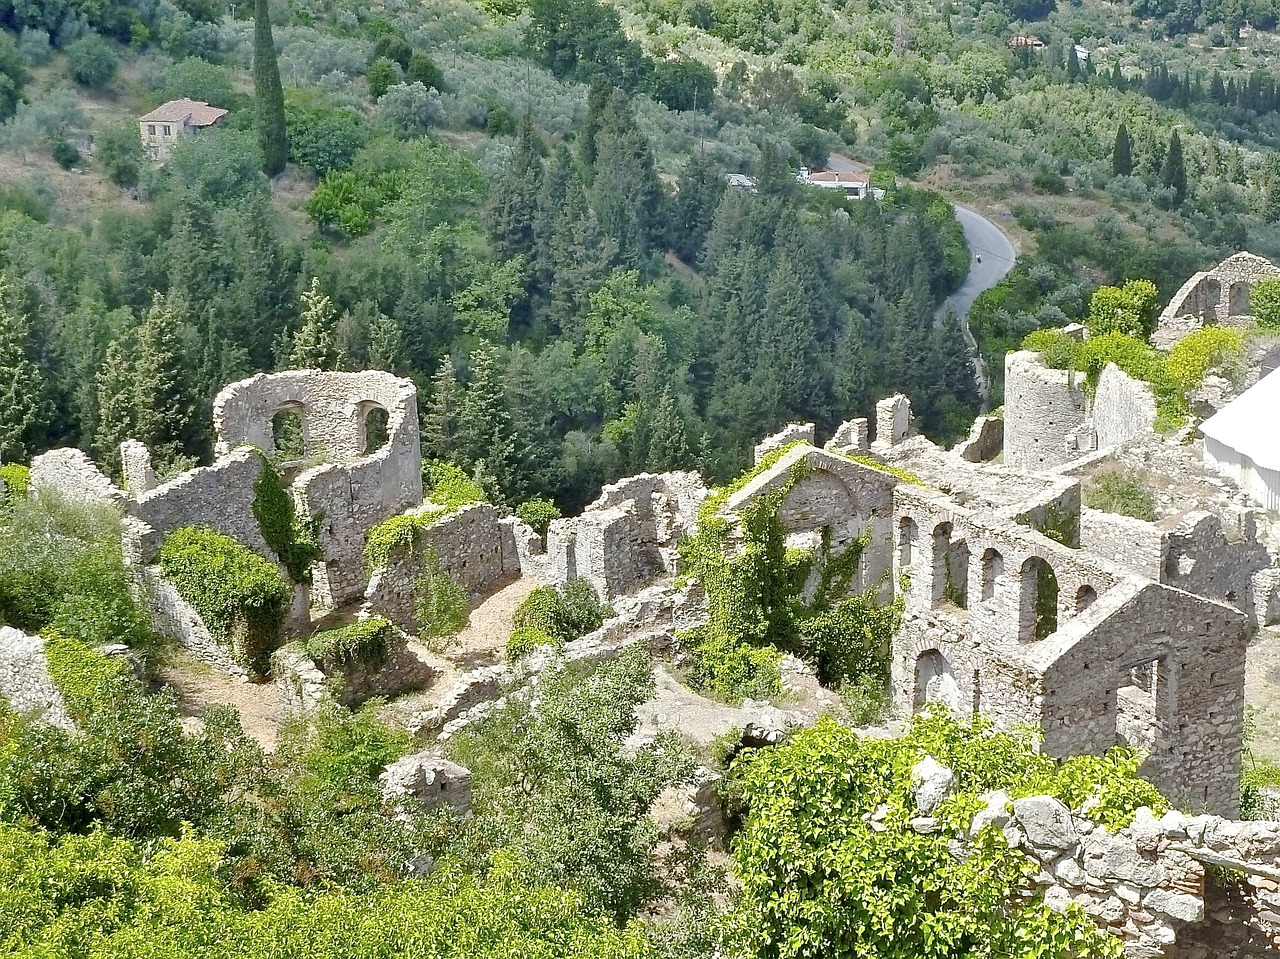 The top archaeological sites in the Peloponnese in Greece include Epidavros, Olympia, Mycenae, Mystras, Tiryns, and Argos.